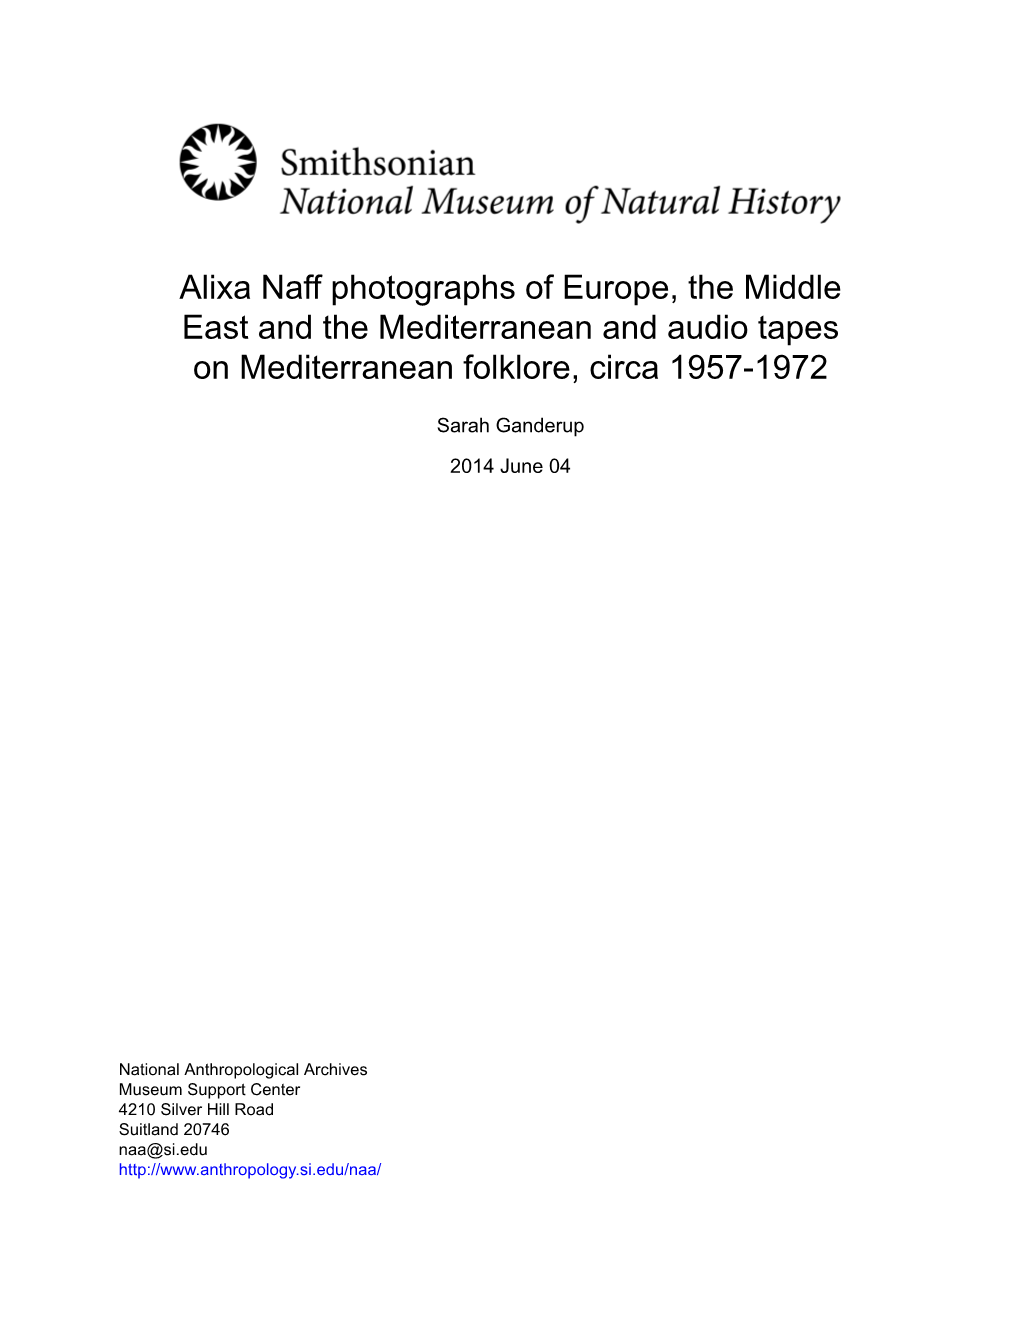 Alixa Naff Photographs of Europe, the Middle East and the Mediterranean and Audio Tapes on Mediterranean Folklore, Circa 1957-1972